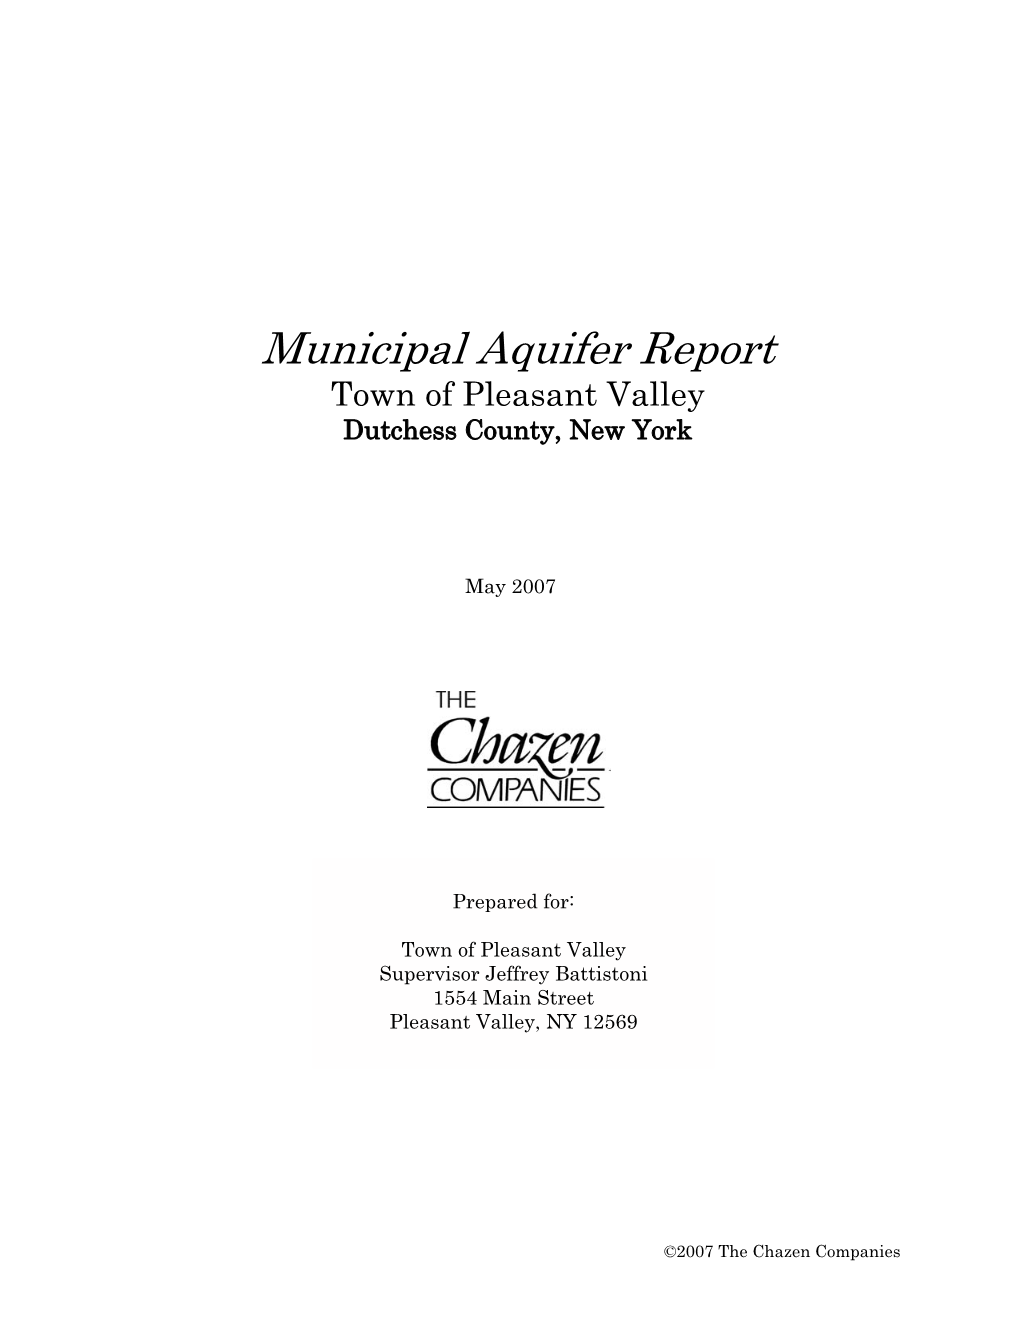 Municipal Aquifer Report Town of Pleasant Valley Dutchess County, New York